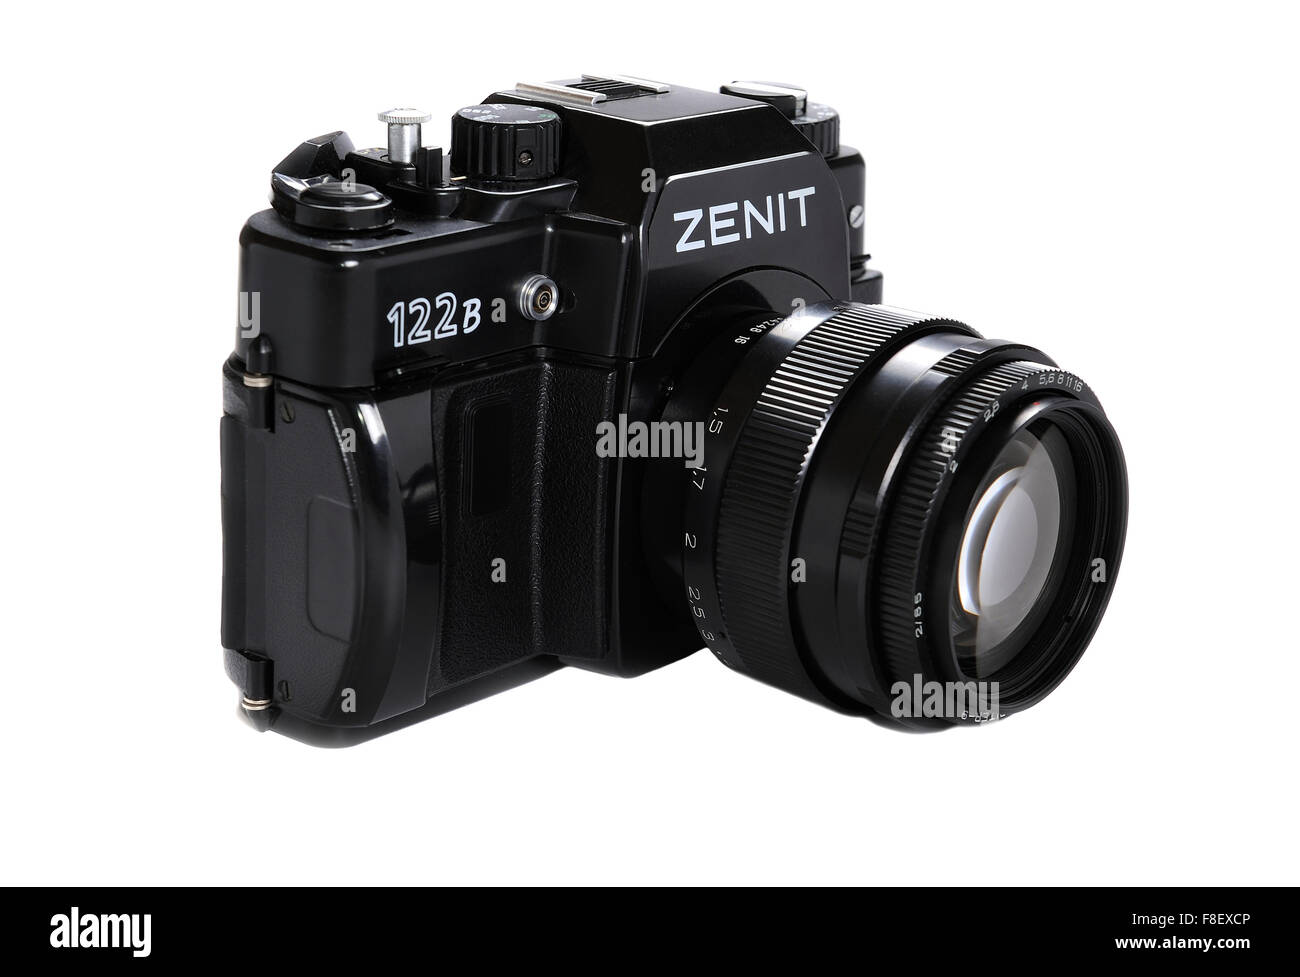 Zenit-122B is a Russian SLR camera with lens JUPITER 9 MS for use with 35 mm film, shallow DOF Stock Photo